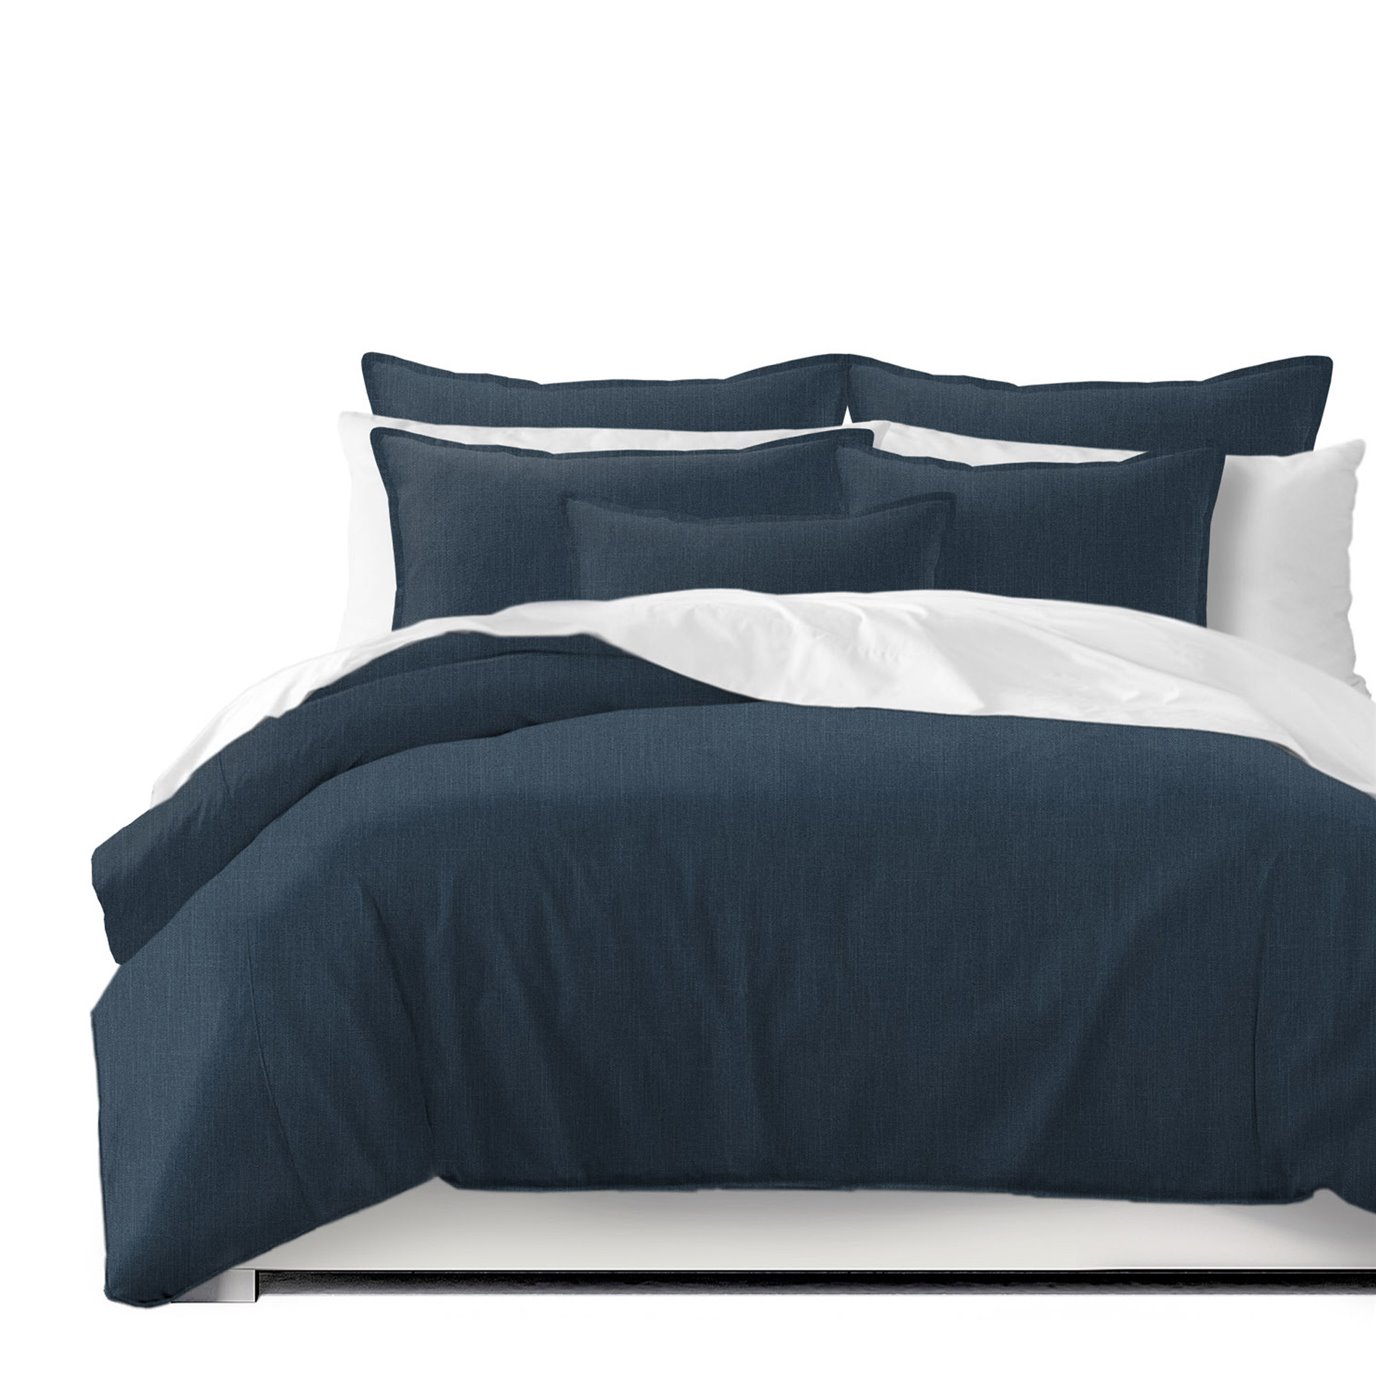 Sutton Navy Coverlet and Pillow Sham(s) Set - Size Twin